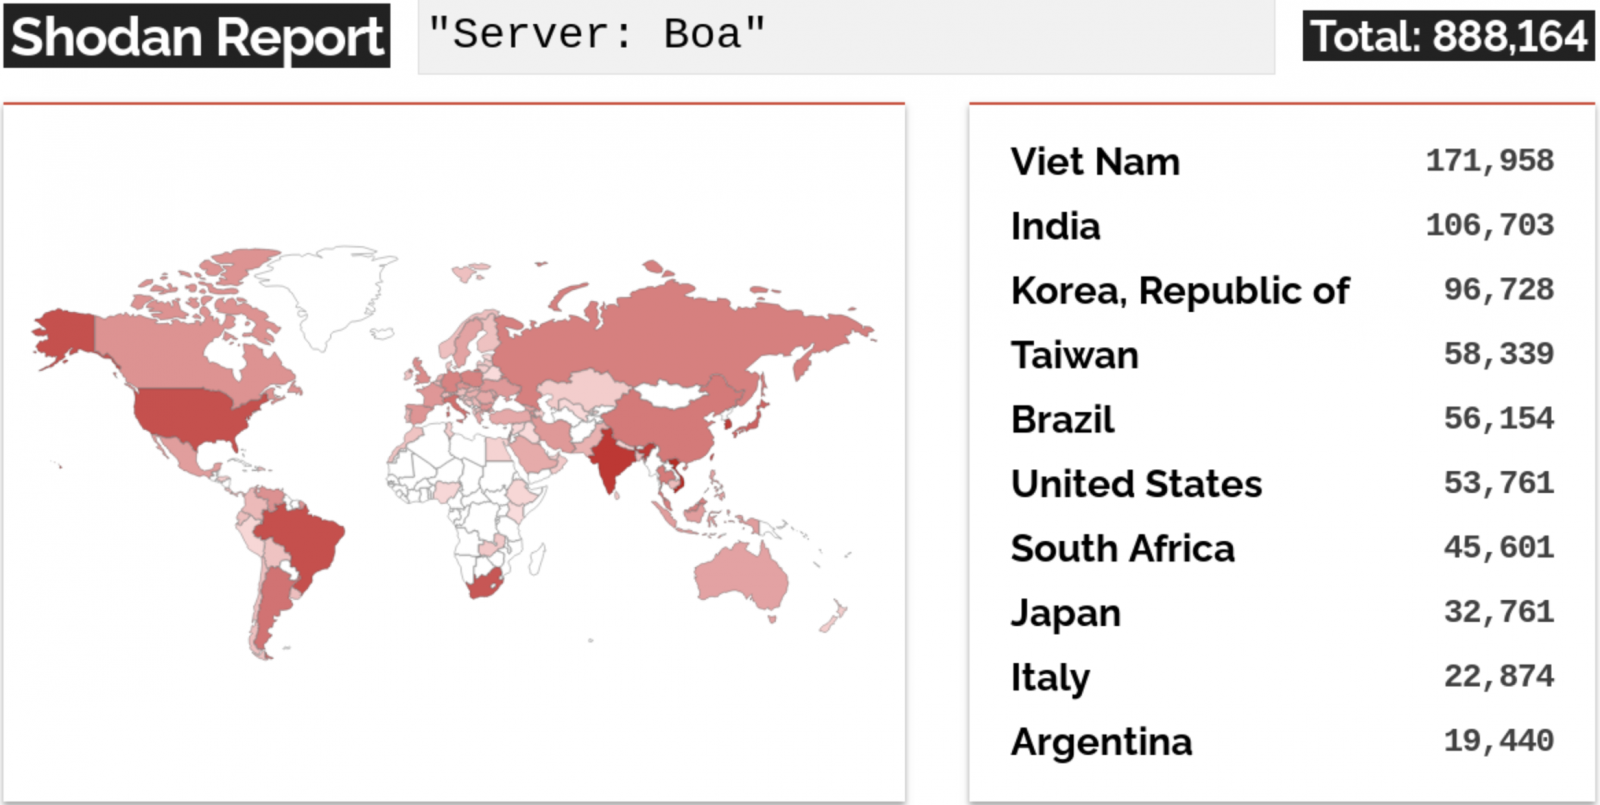 Boa servers exposed to the Internet